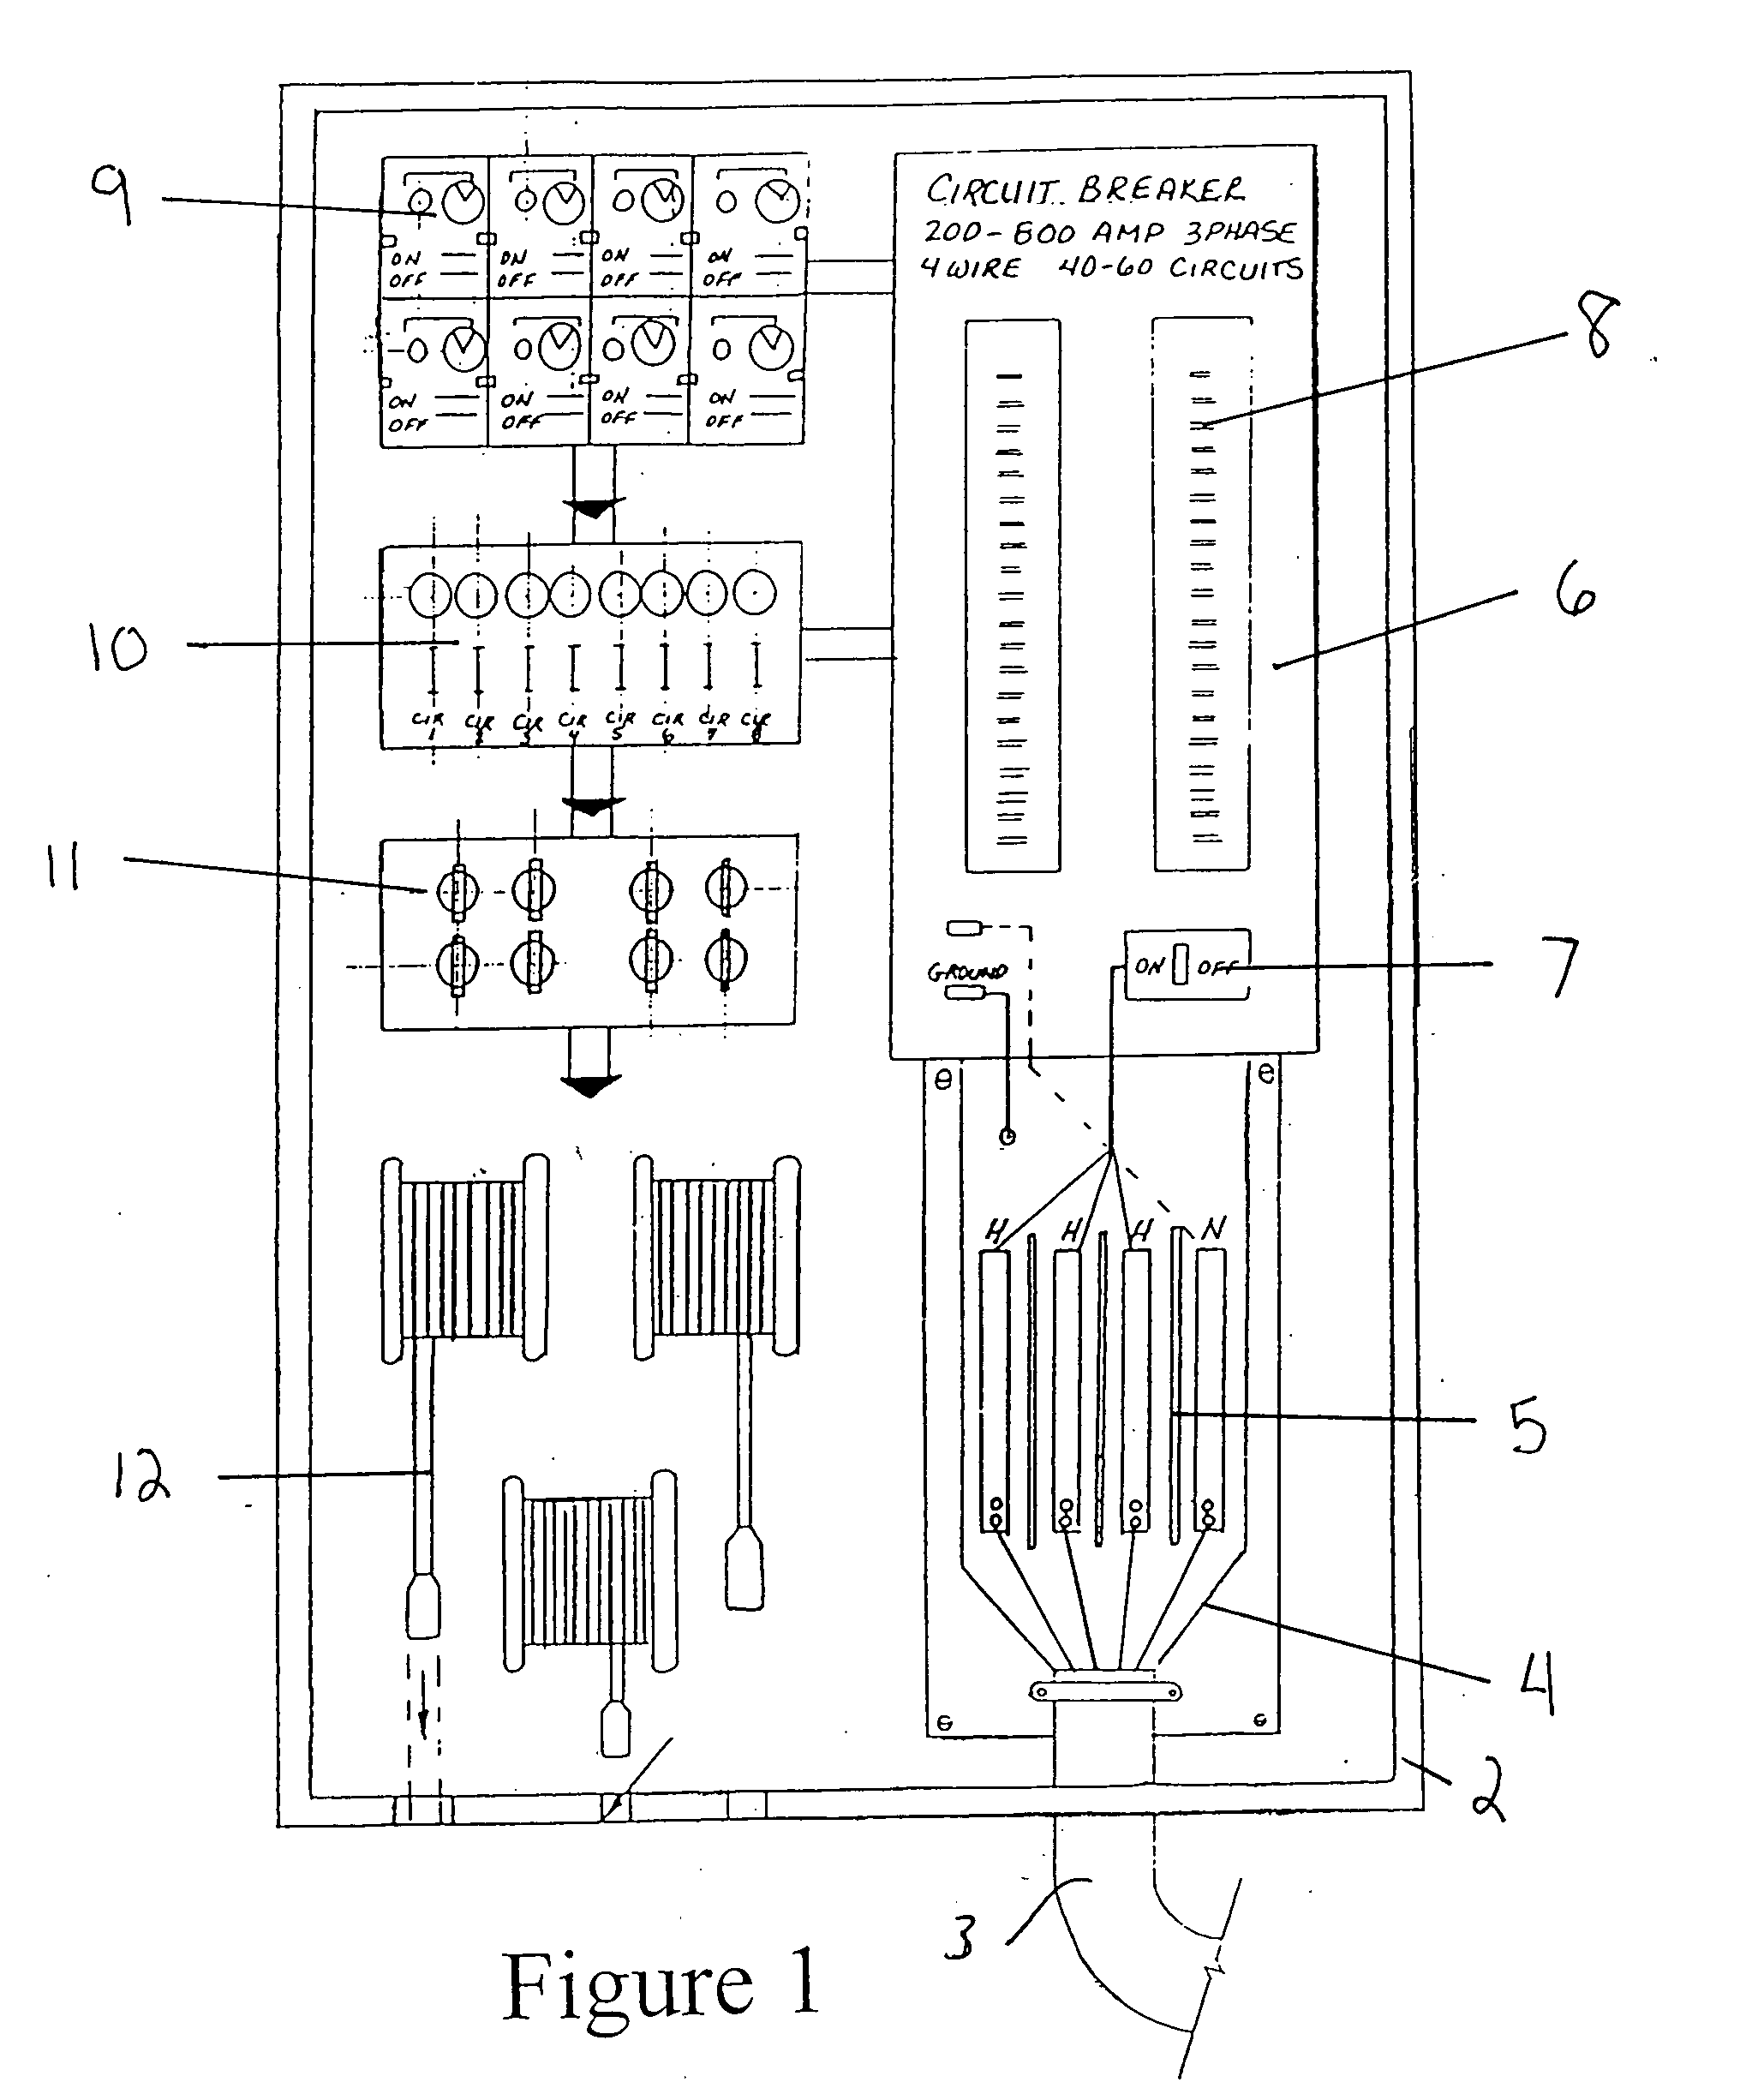 Integrated, self-contained power distribution system